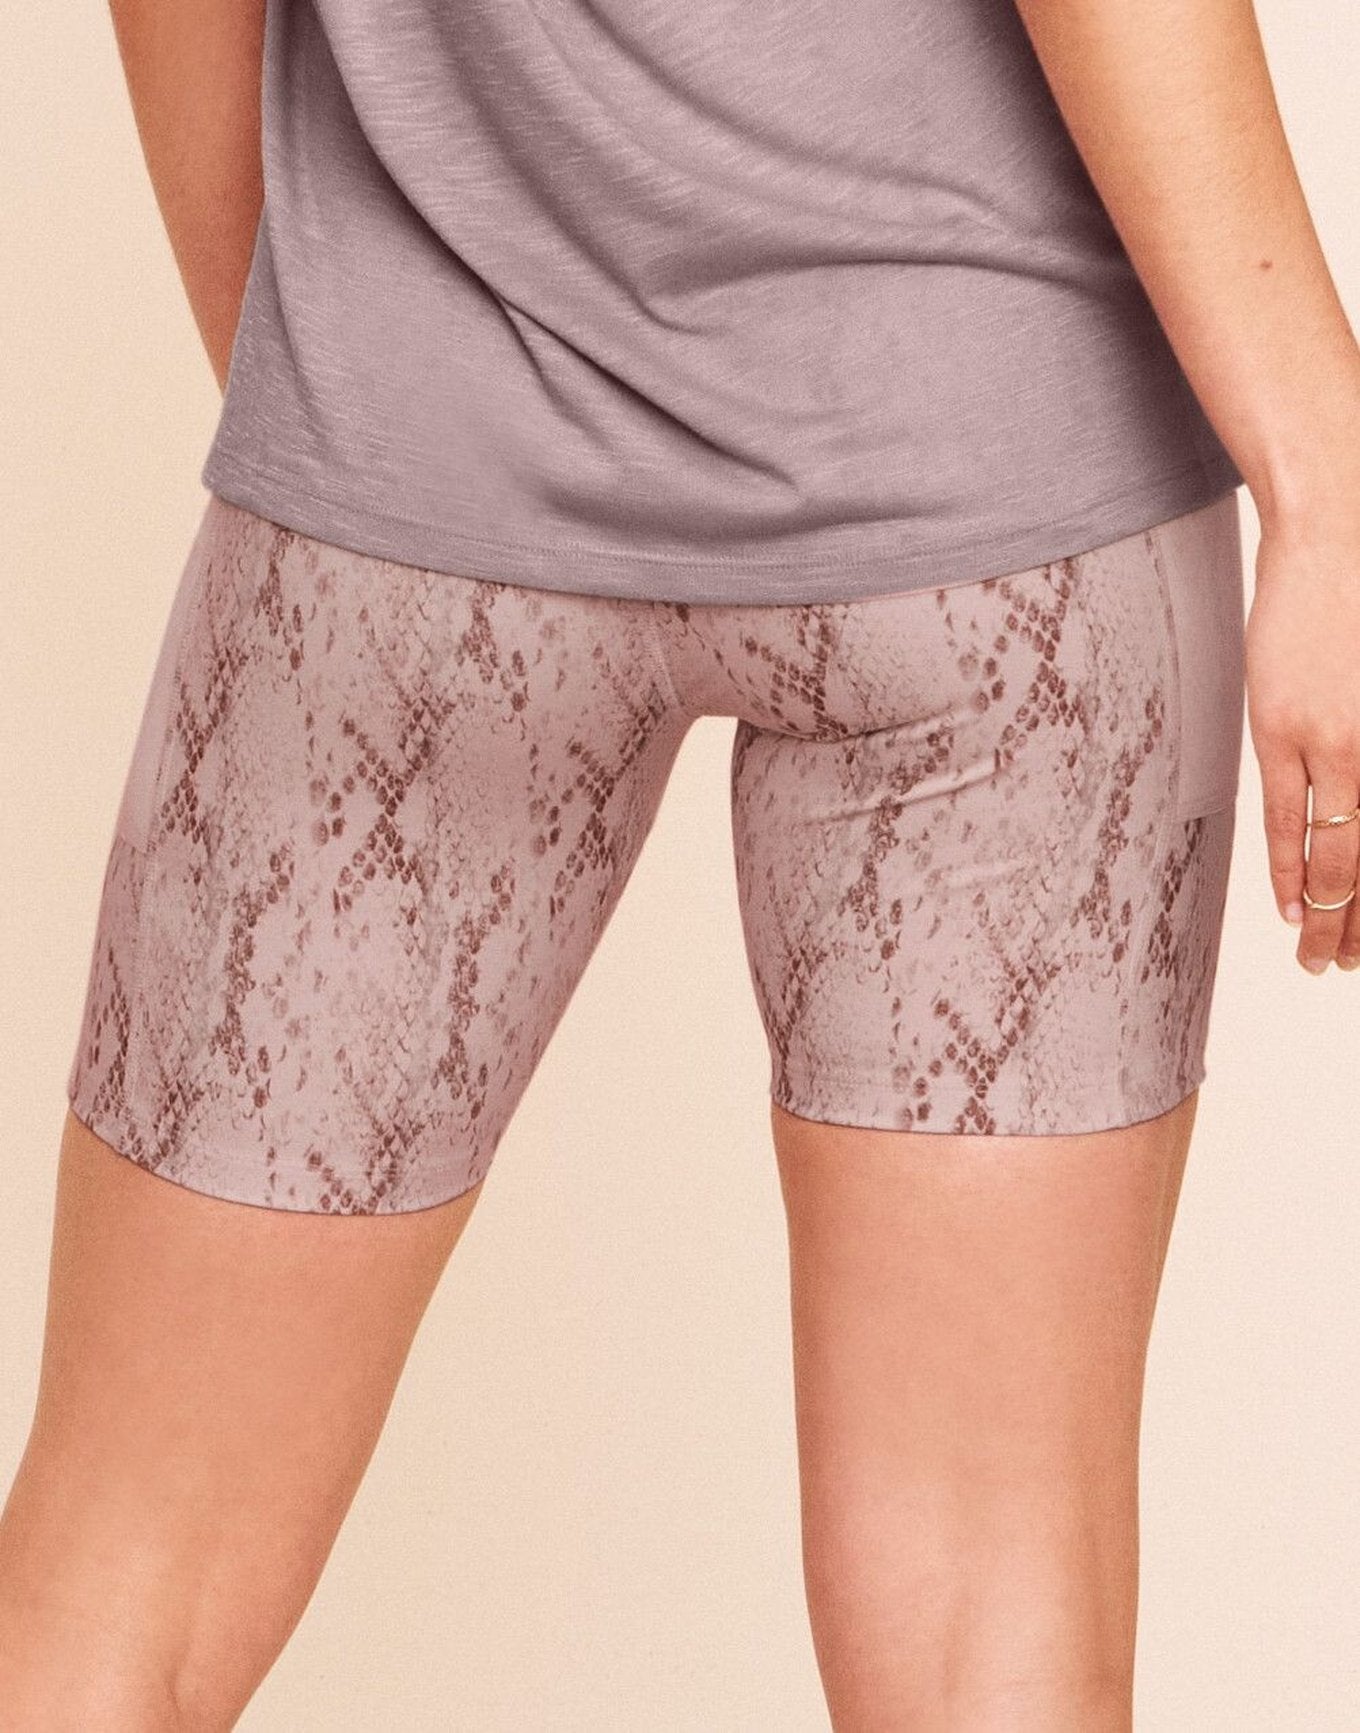 Earth Republic Anais High Waisted Short Biker Shorts in color Snakeskin (Sports Print 2) and shape short